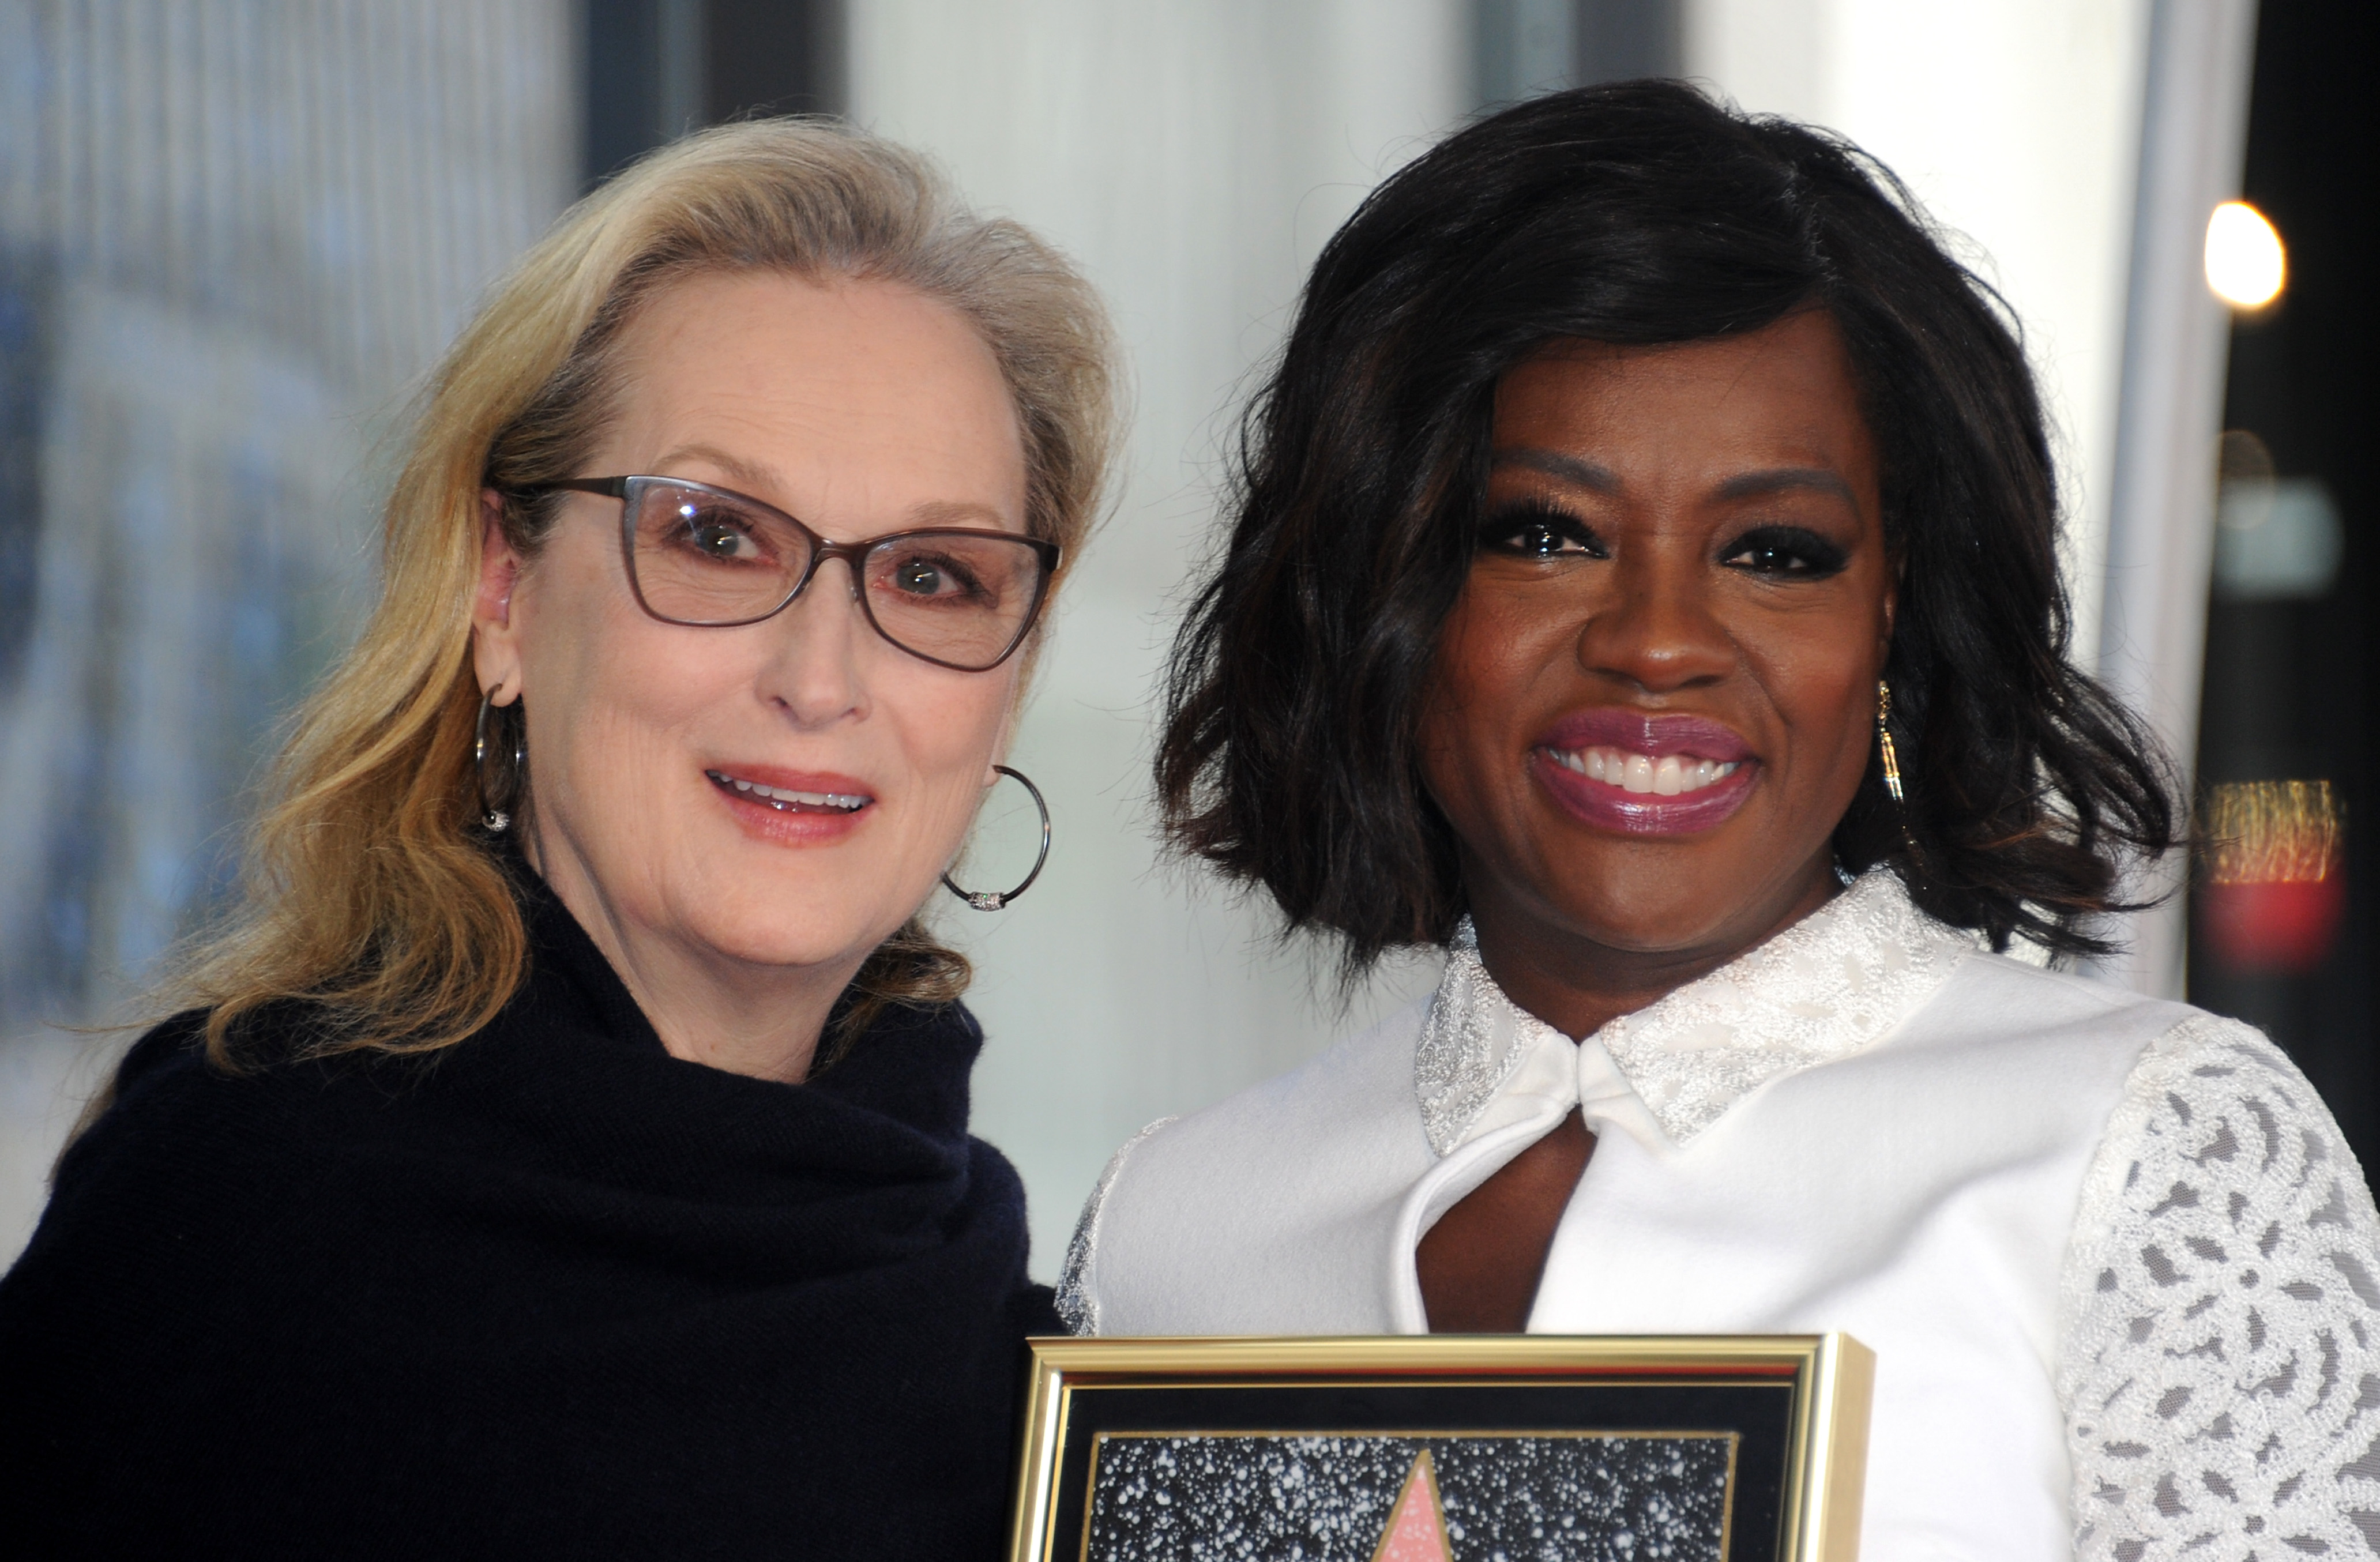 Actress Viola Davis (R) and actress Meryl Streep attend her Star ceremony on the Hollywood Walk of Fame on January 5, 2017 in Hollywood, California  (Photo by Albert L. Ortega/Getty Images) (Albert L. Ortega—Getty Images)